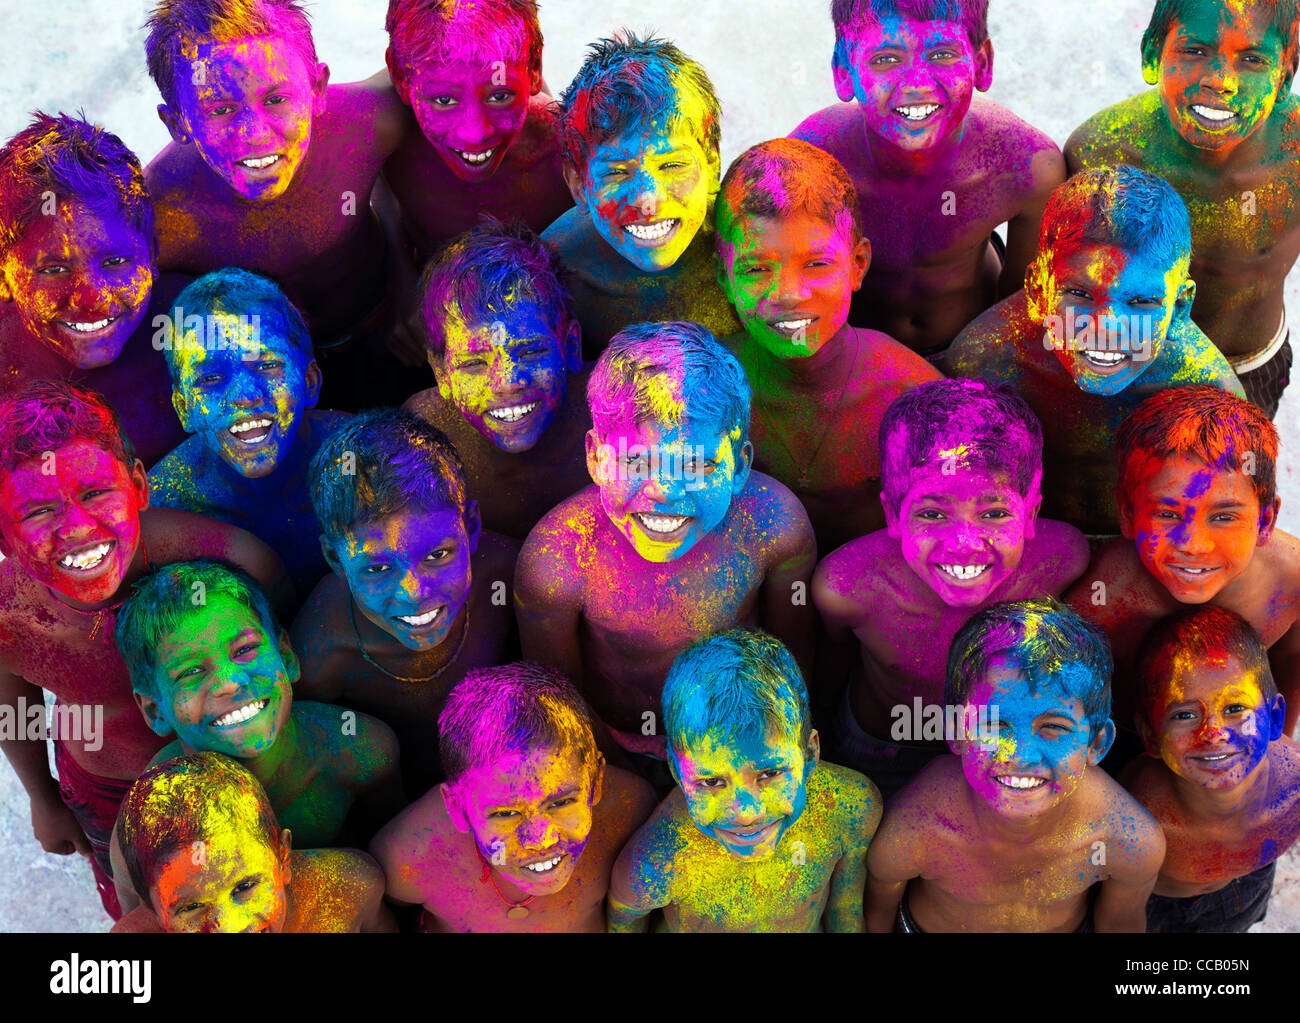 Young Happy smiling Indian boys covered in coloured powder pigment. India Stock Photo